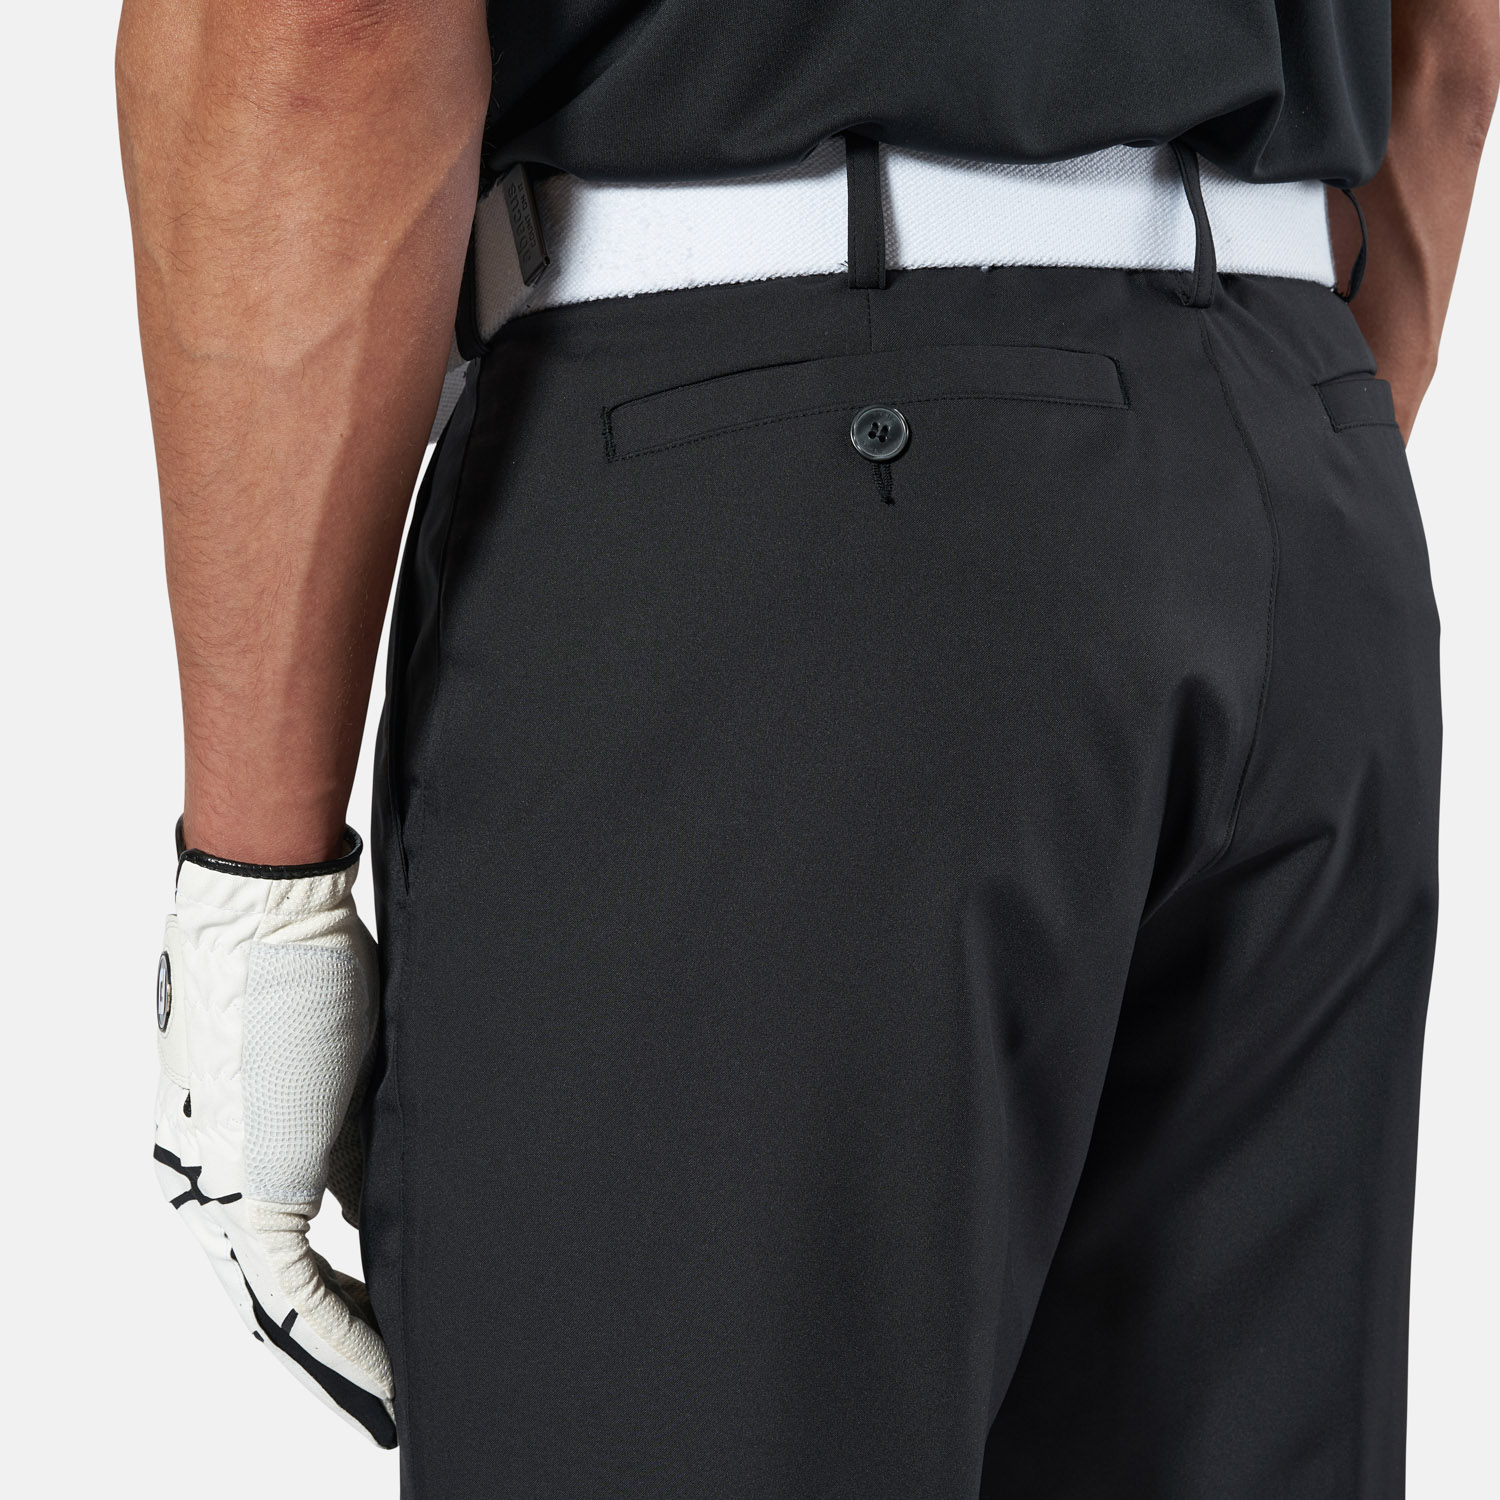 PING BRADLEY TROUSERS NAVY - MAN TROUSERS - golf clothing - The Golf Square